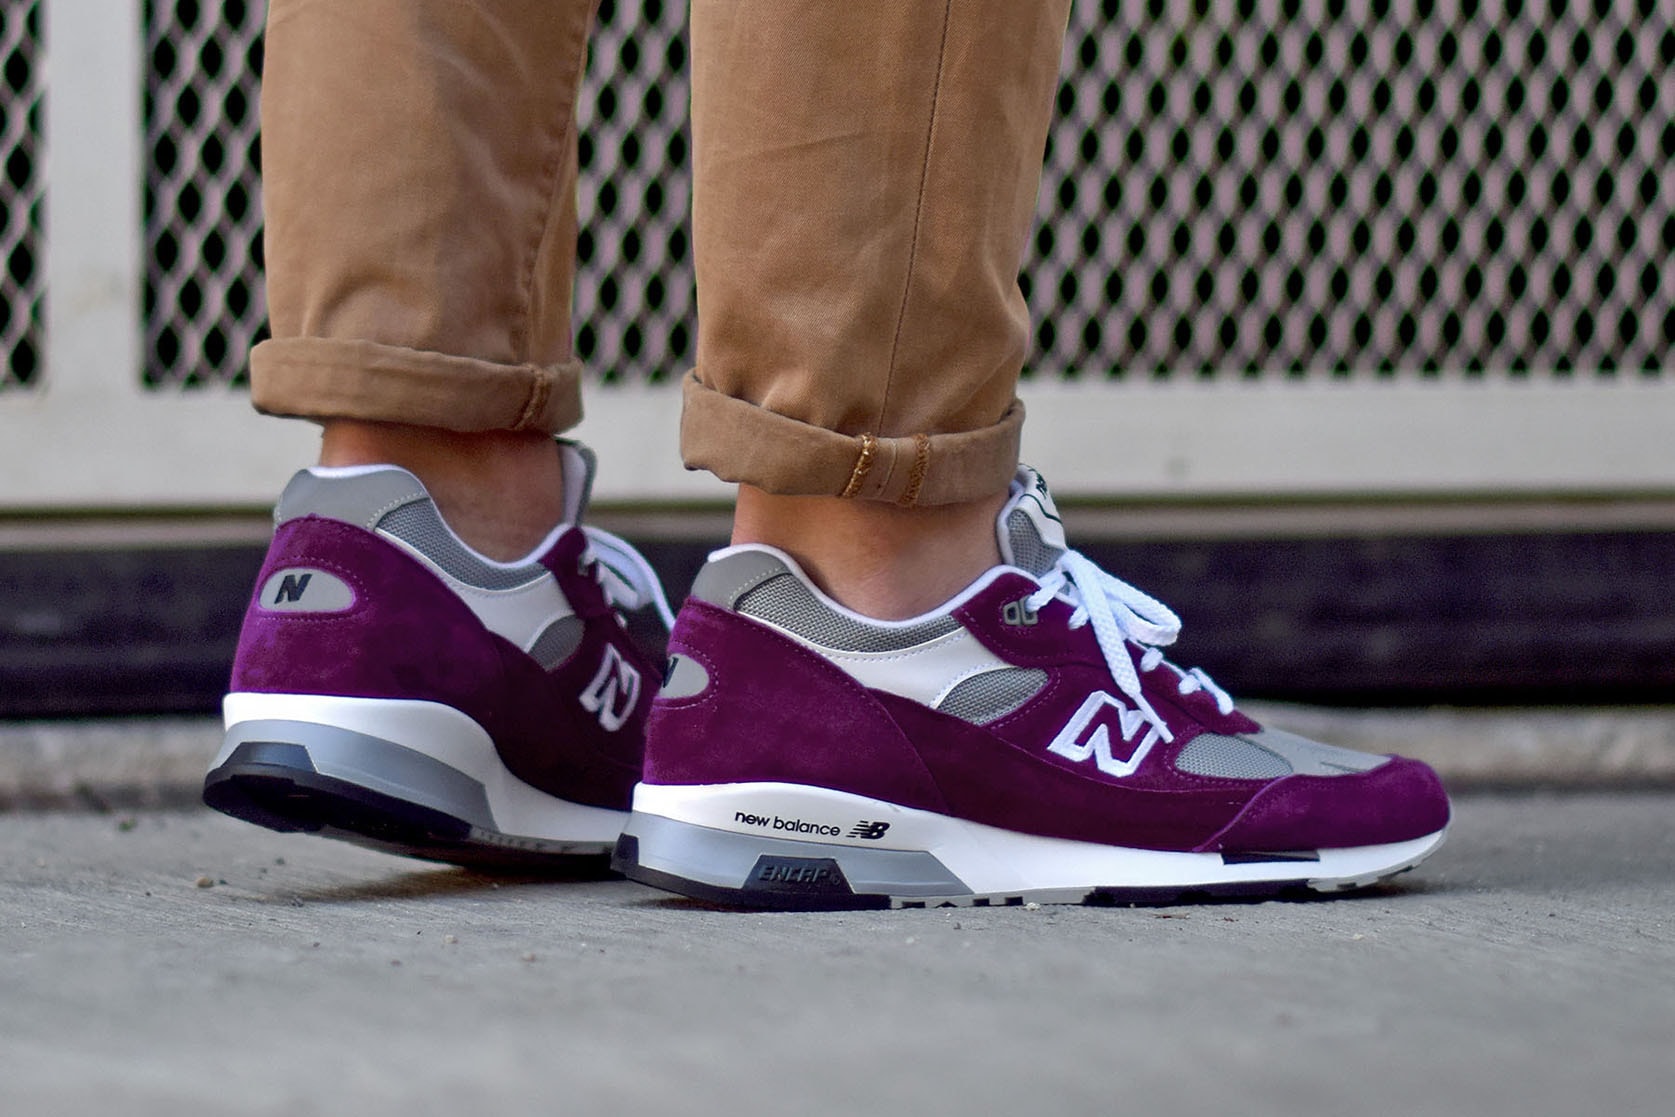 New Balance 991.5 SNKRS Plum Made in UK Flimby Purple Grey White Release Information Details News